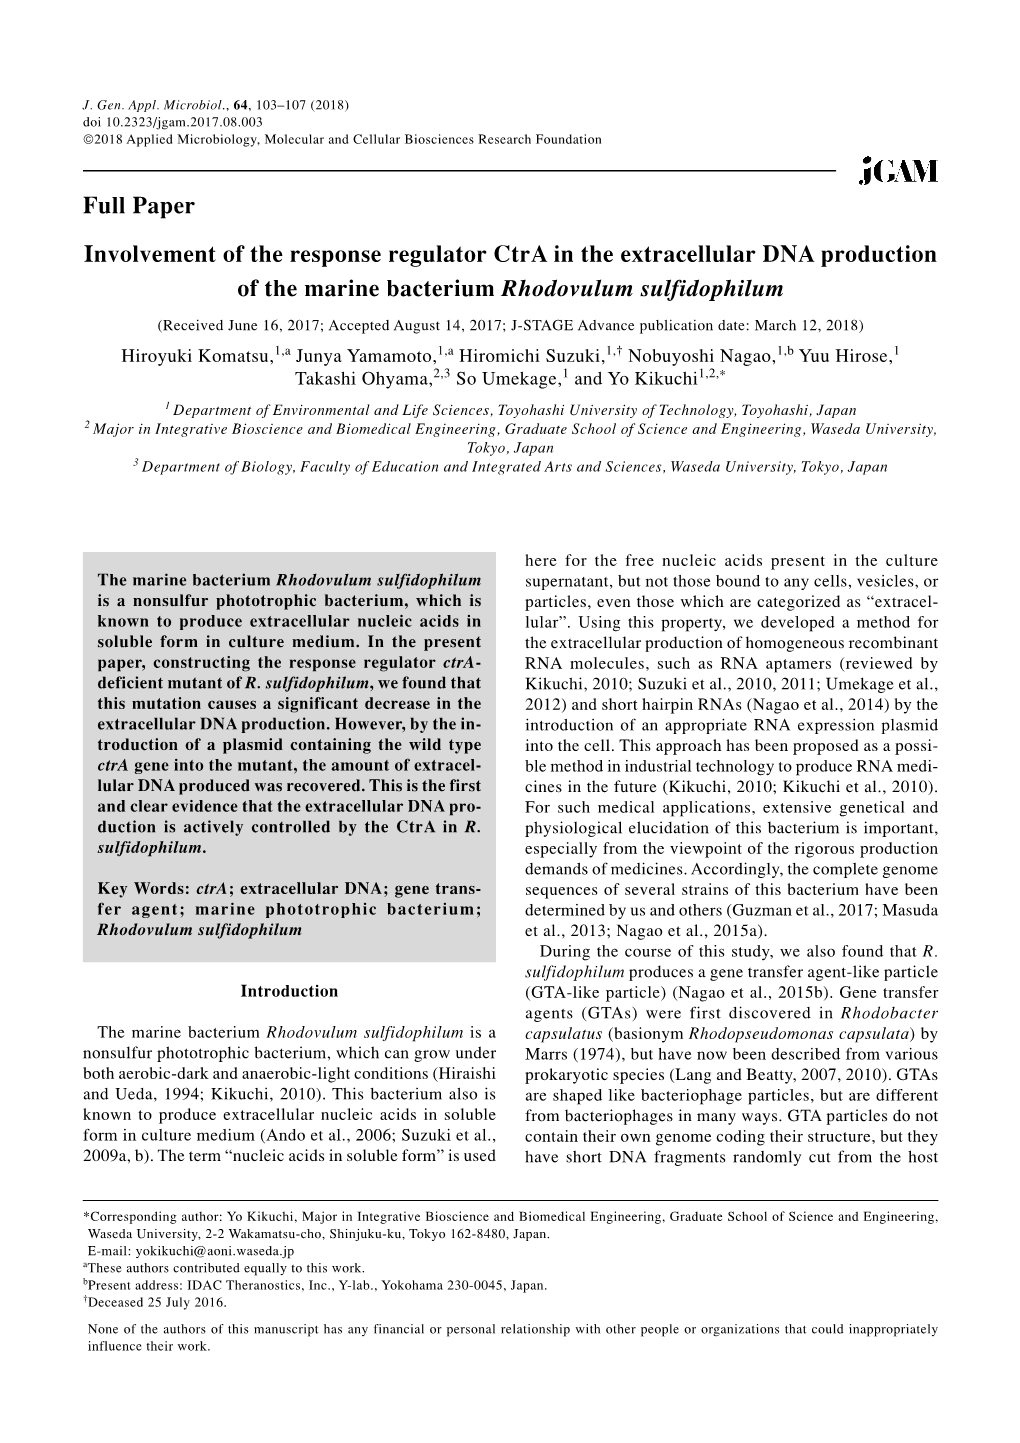 Involvement of the Response Regulator Ctra in the Extracellular DNA Production of the Marine Bacterium Rhodovulum Sulfidophilum